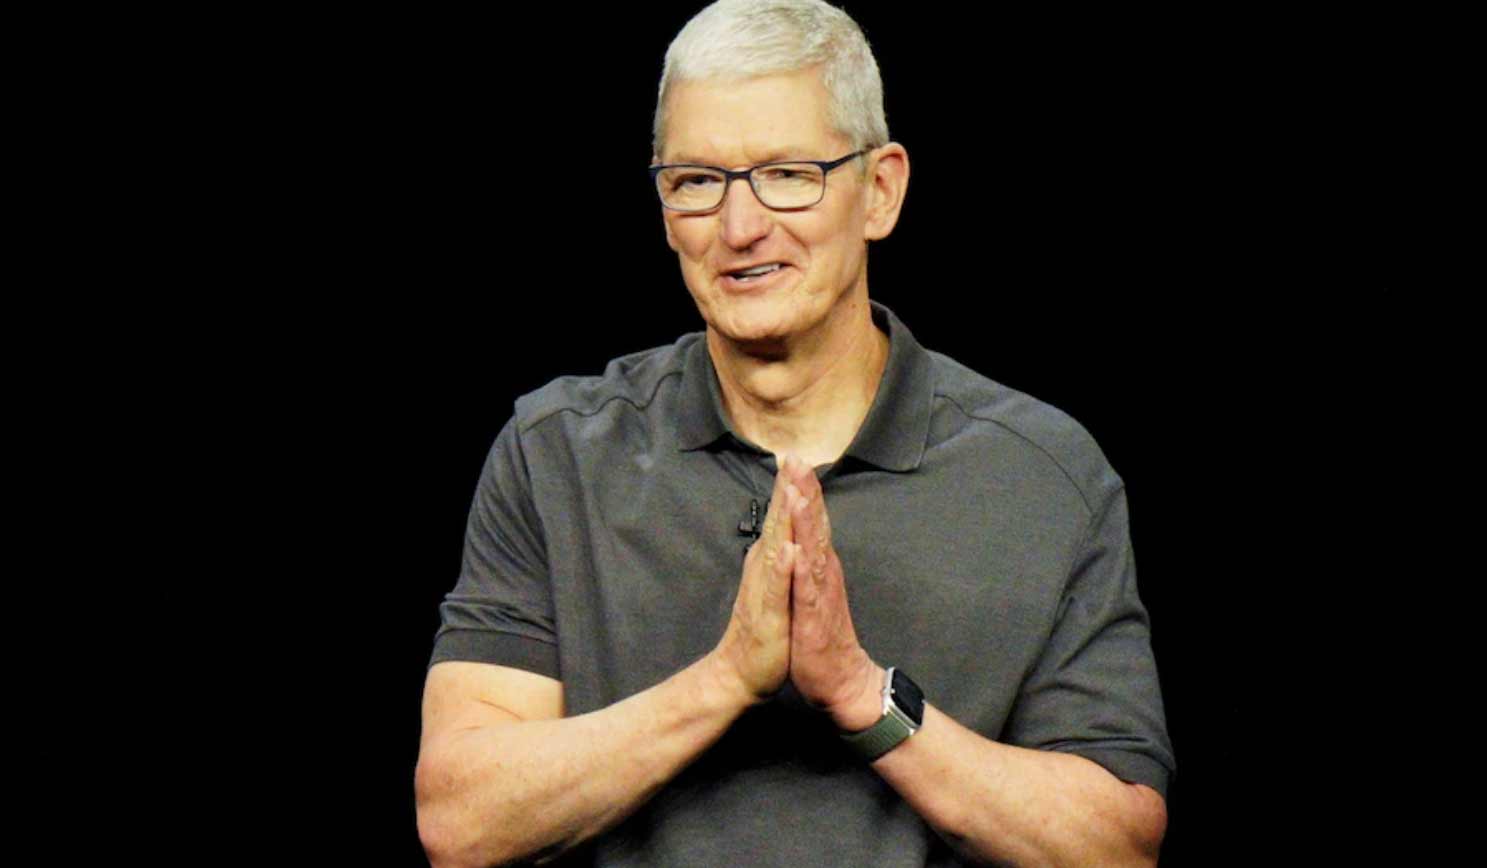 Apple CEO Tim Cook on Diwali: May Your Celebrations be Filled With Warmth, Prosperity